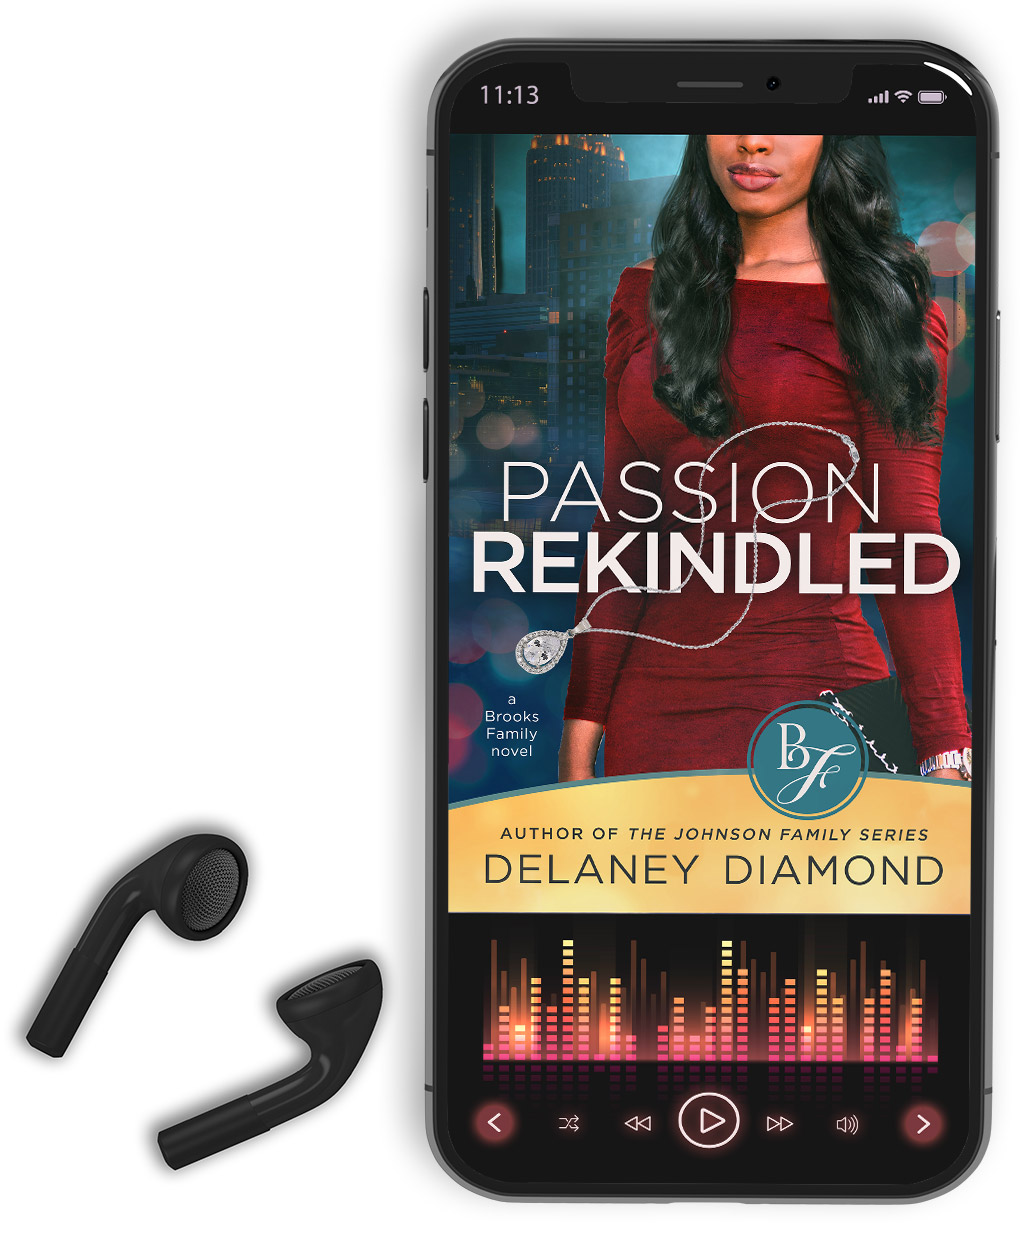 Passion Rekindled - Brooks family series #2 - Audiobook by Delaney Diamond